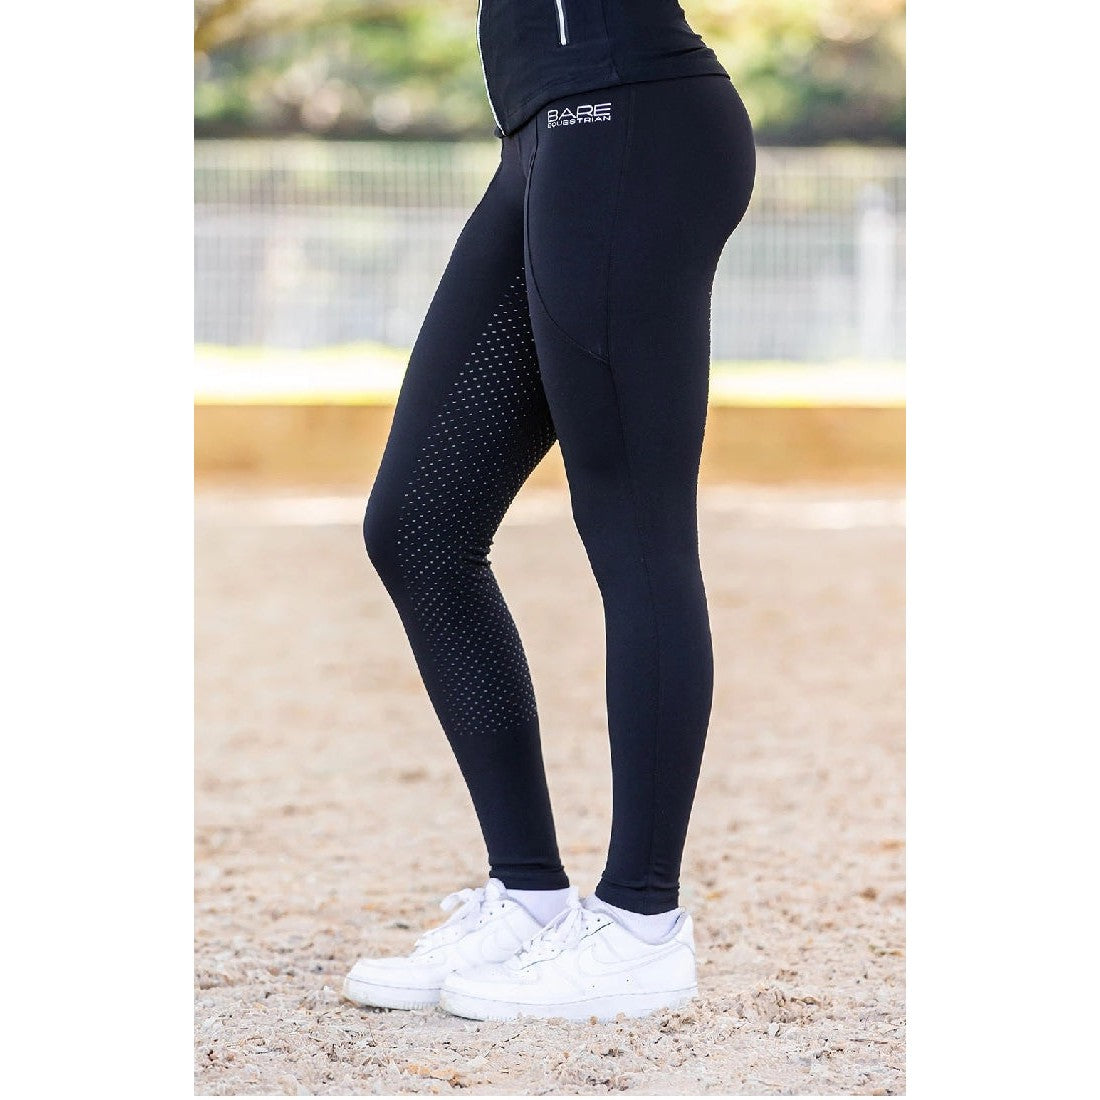 Person standing in black horse riding tights with dot pattern.